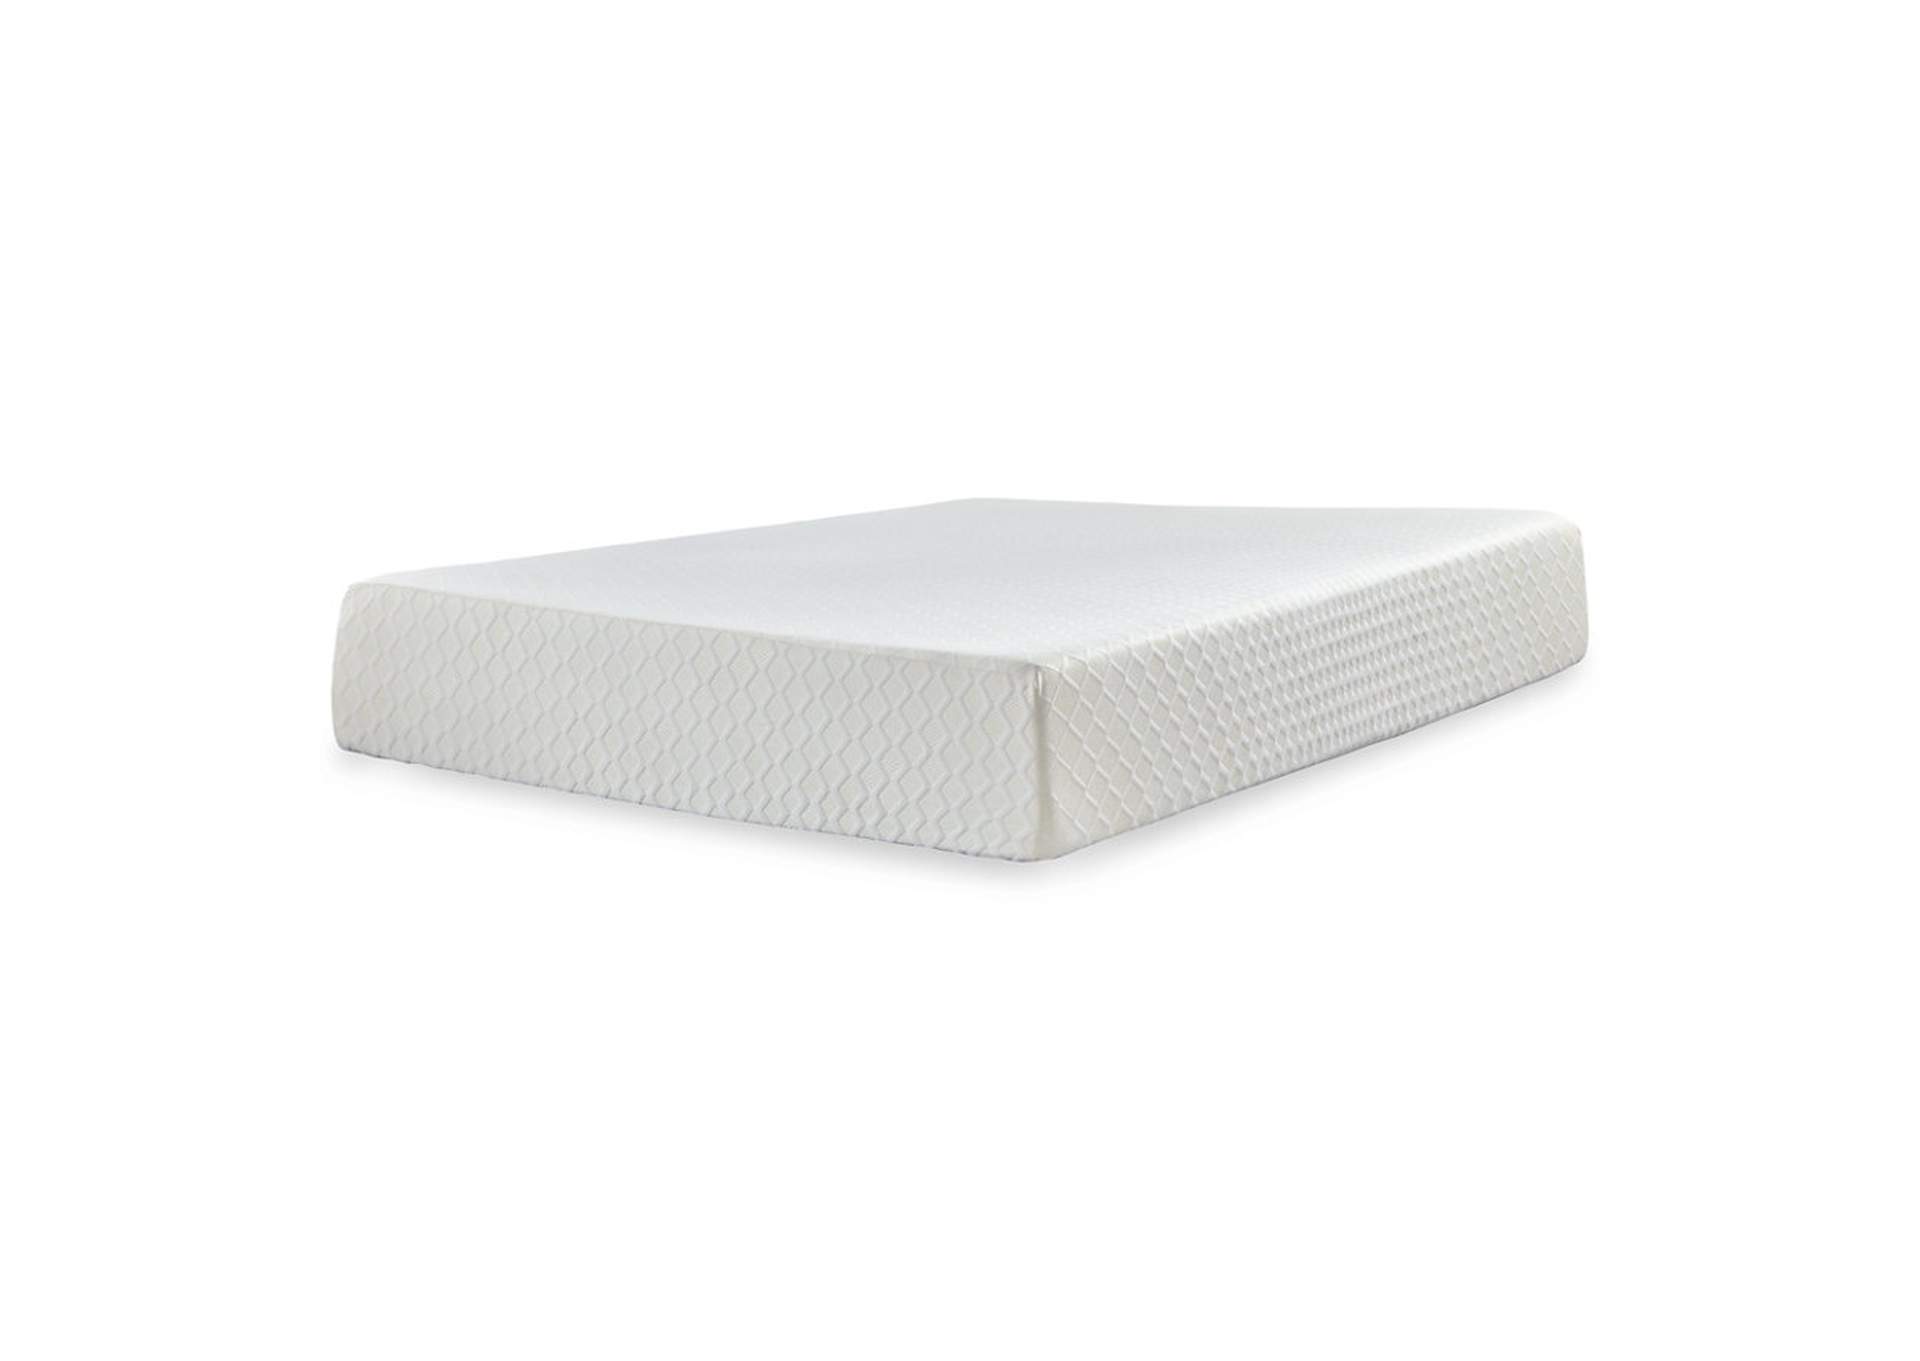 Chime 12 Inch Memory Foam Full Mattress in a Box,Direct To Consumer Express